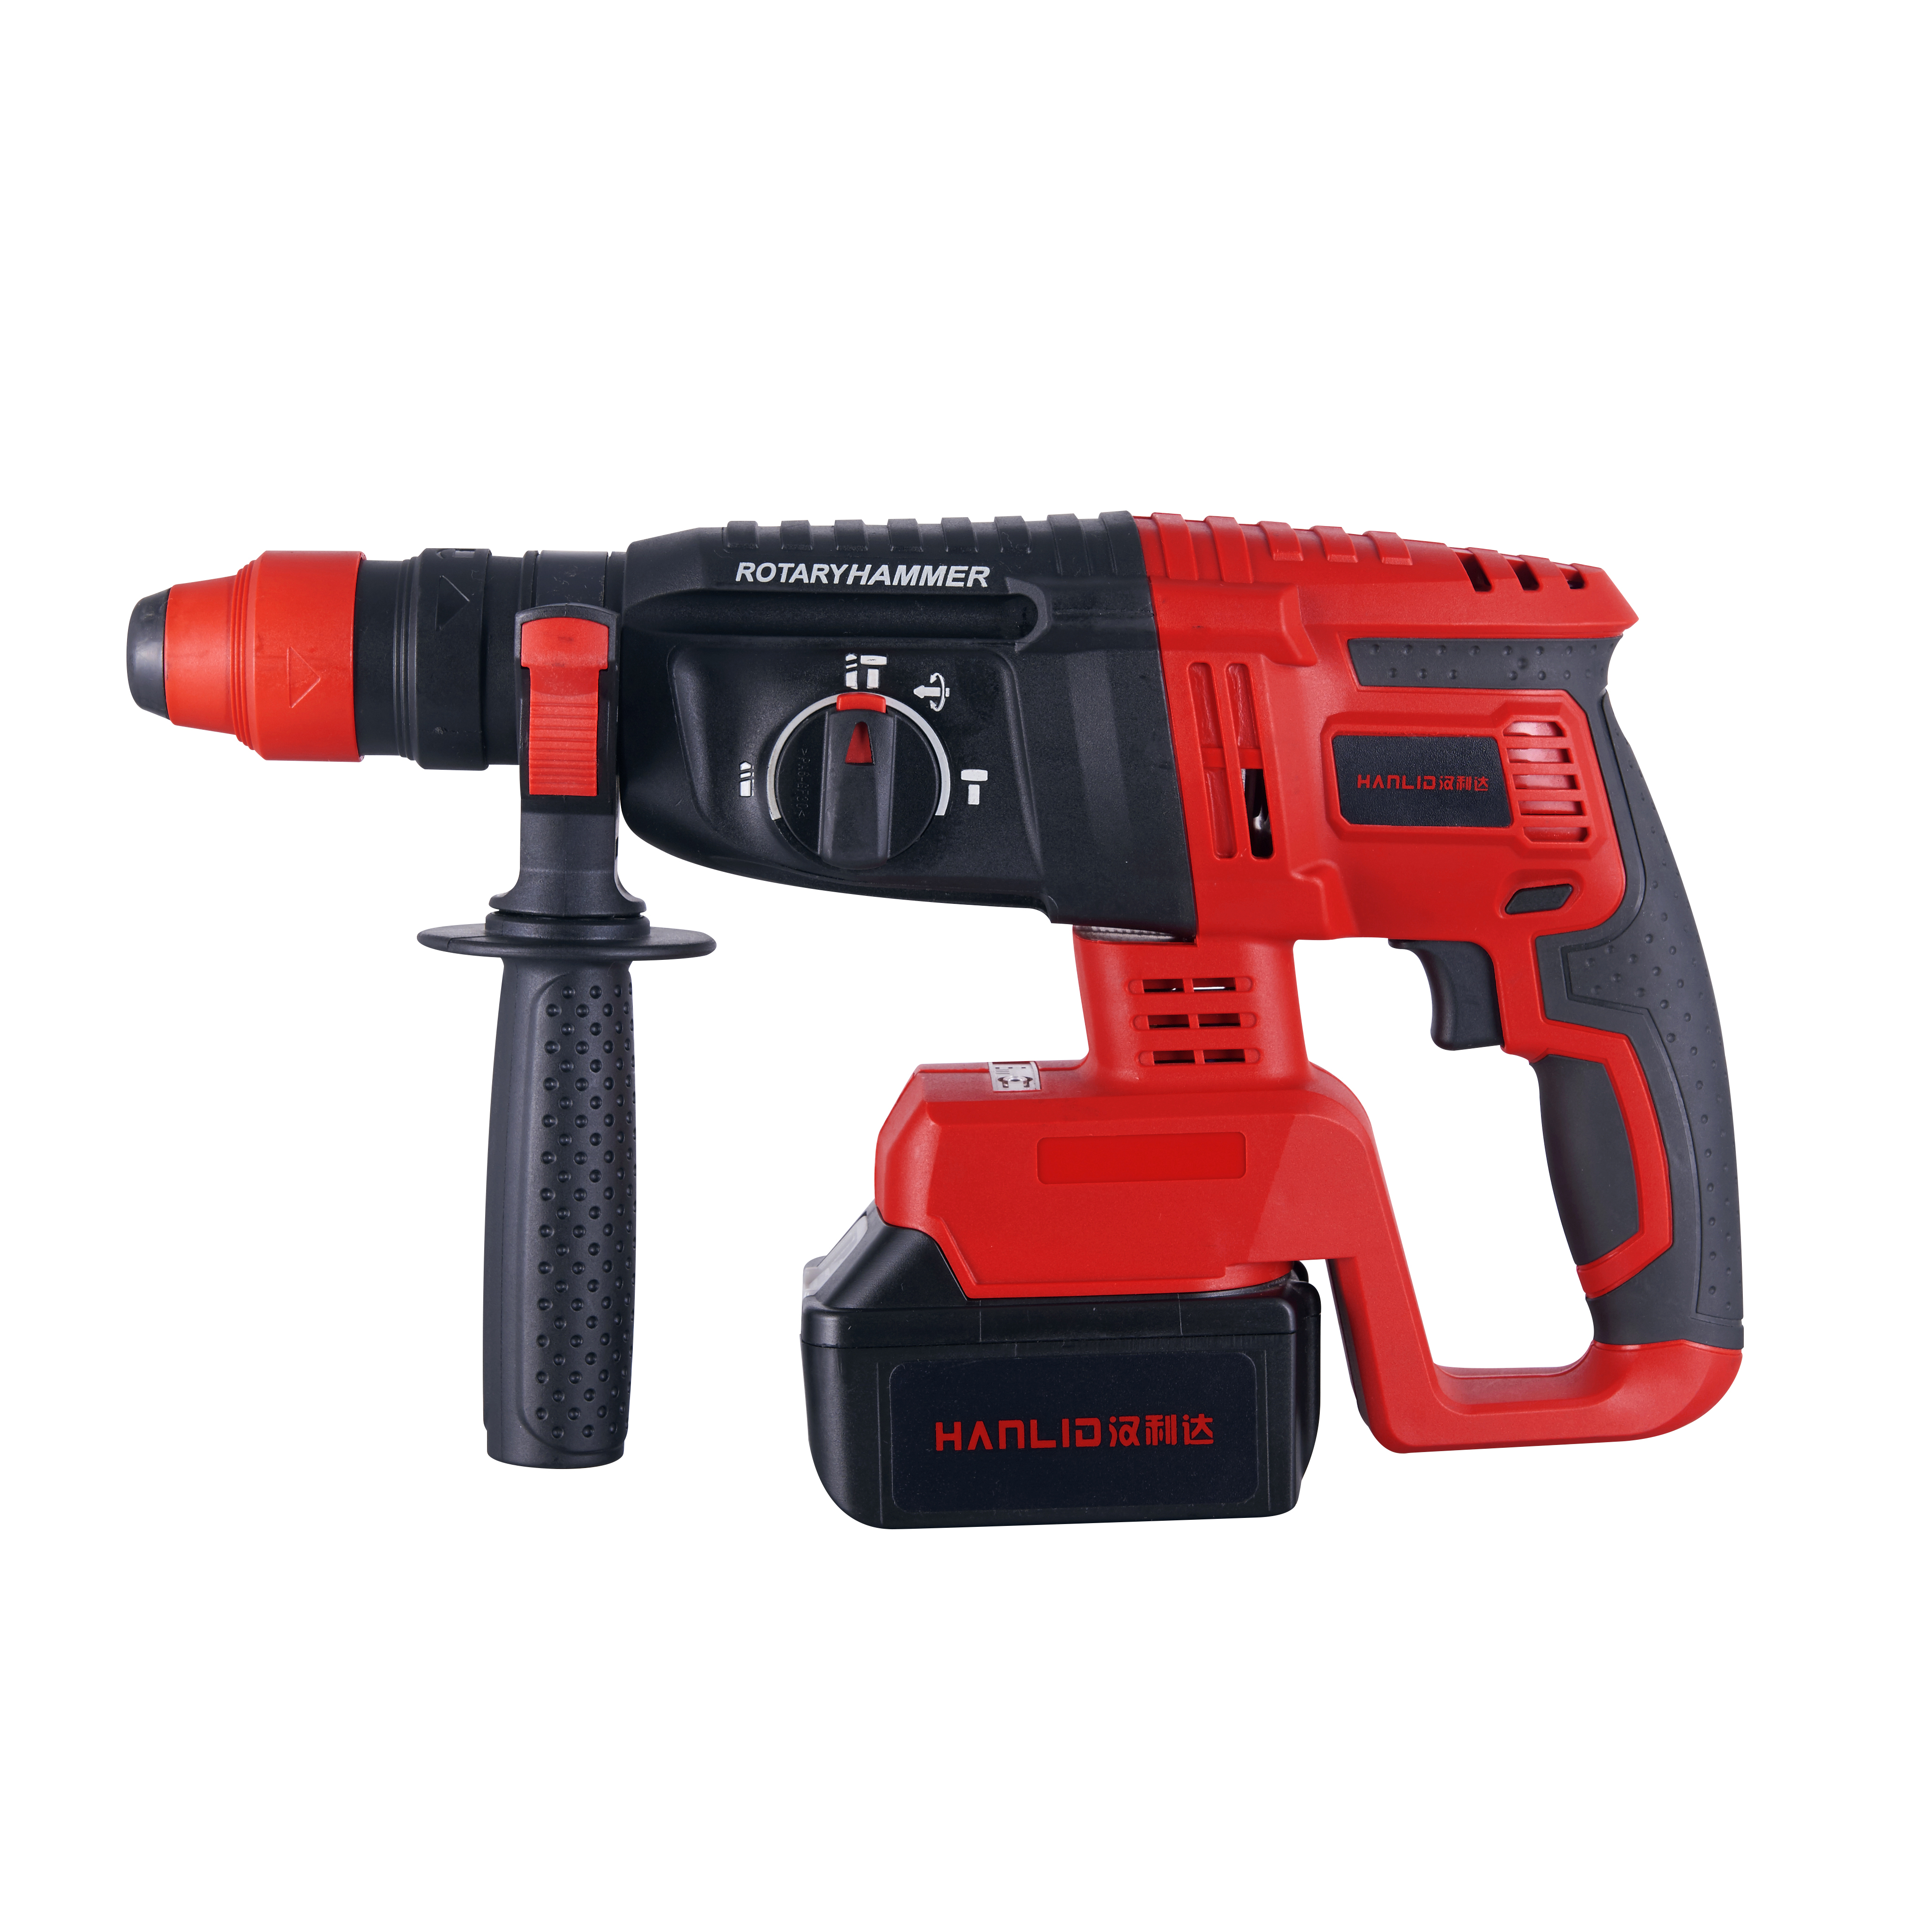 Lithium Electric Hammer 26mm Zhl-26/zhl2-26v Featured Image